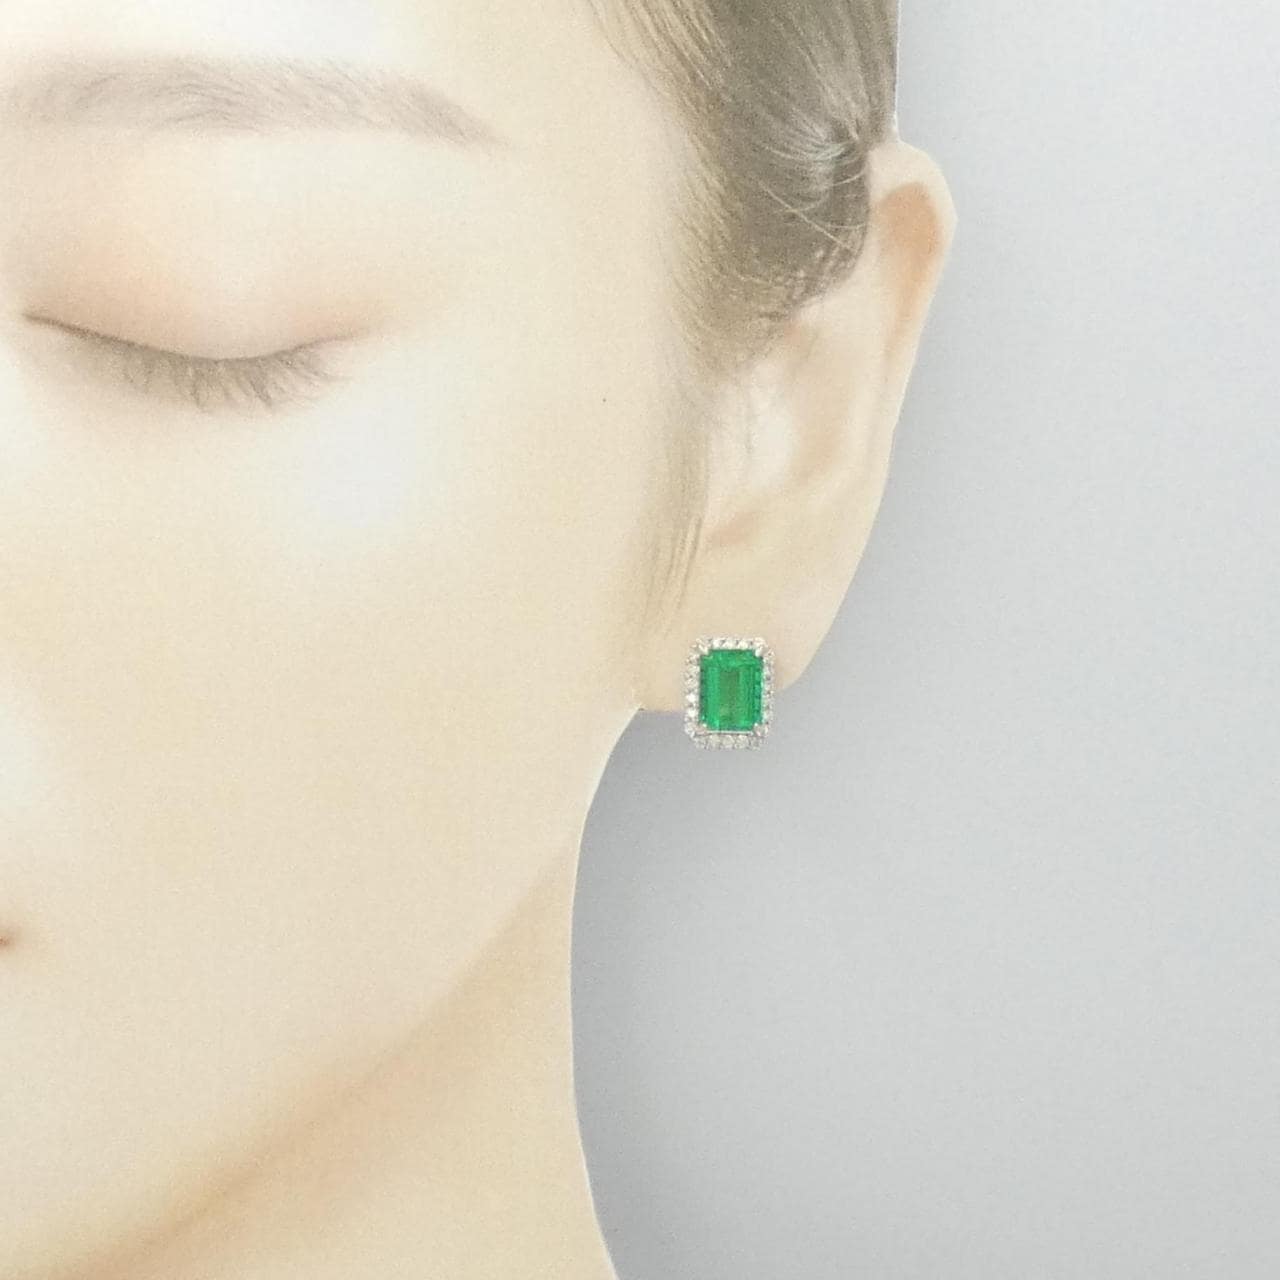 [Remake] PT emerald earrings 5.034CT Made in Colombia